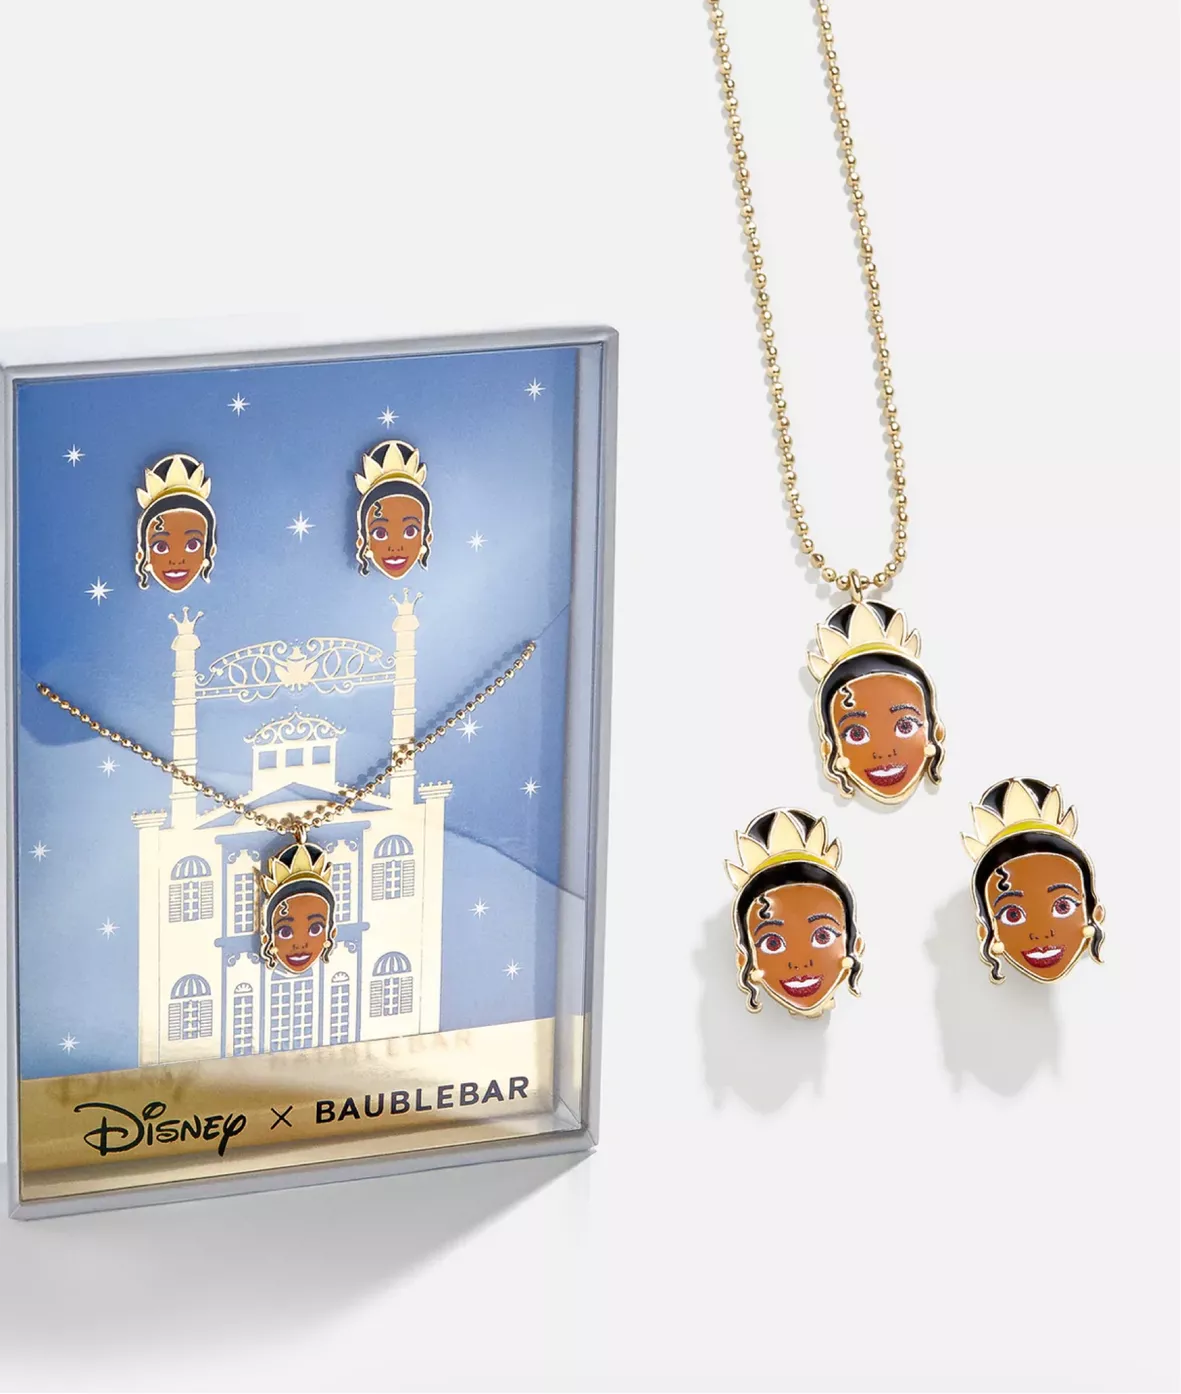 Baublebar Los Angeles Chargers Disney Mickey Mouse Bag Charm